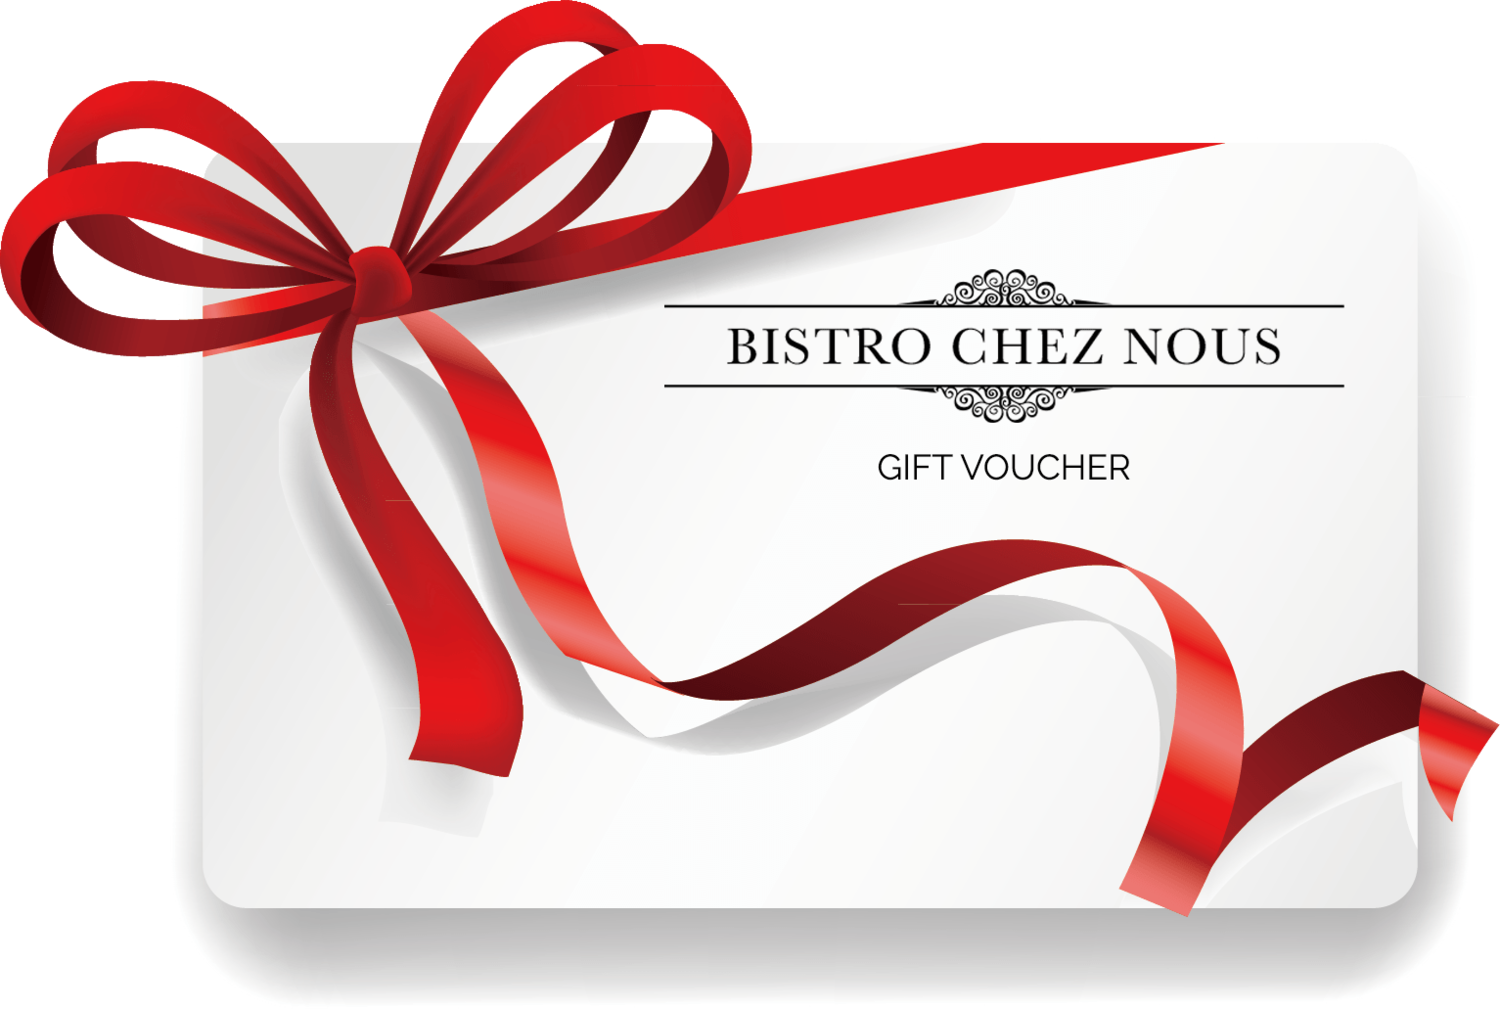  Carte cadeau  - Email- Email: Gift Cards